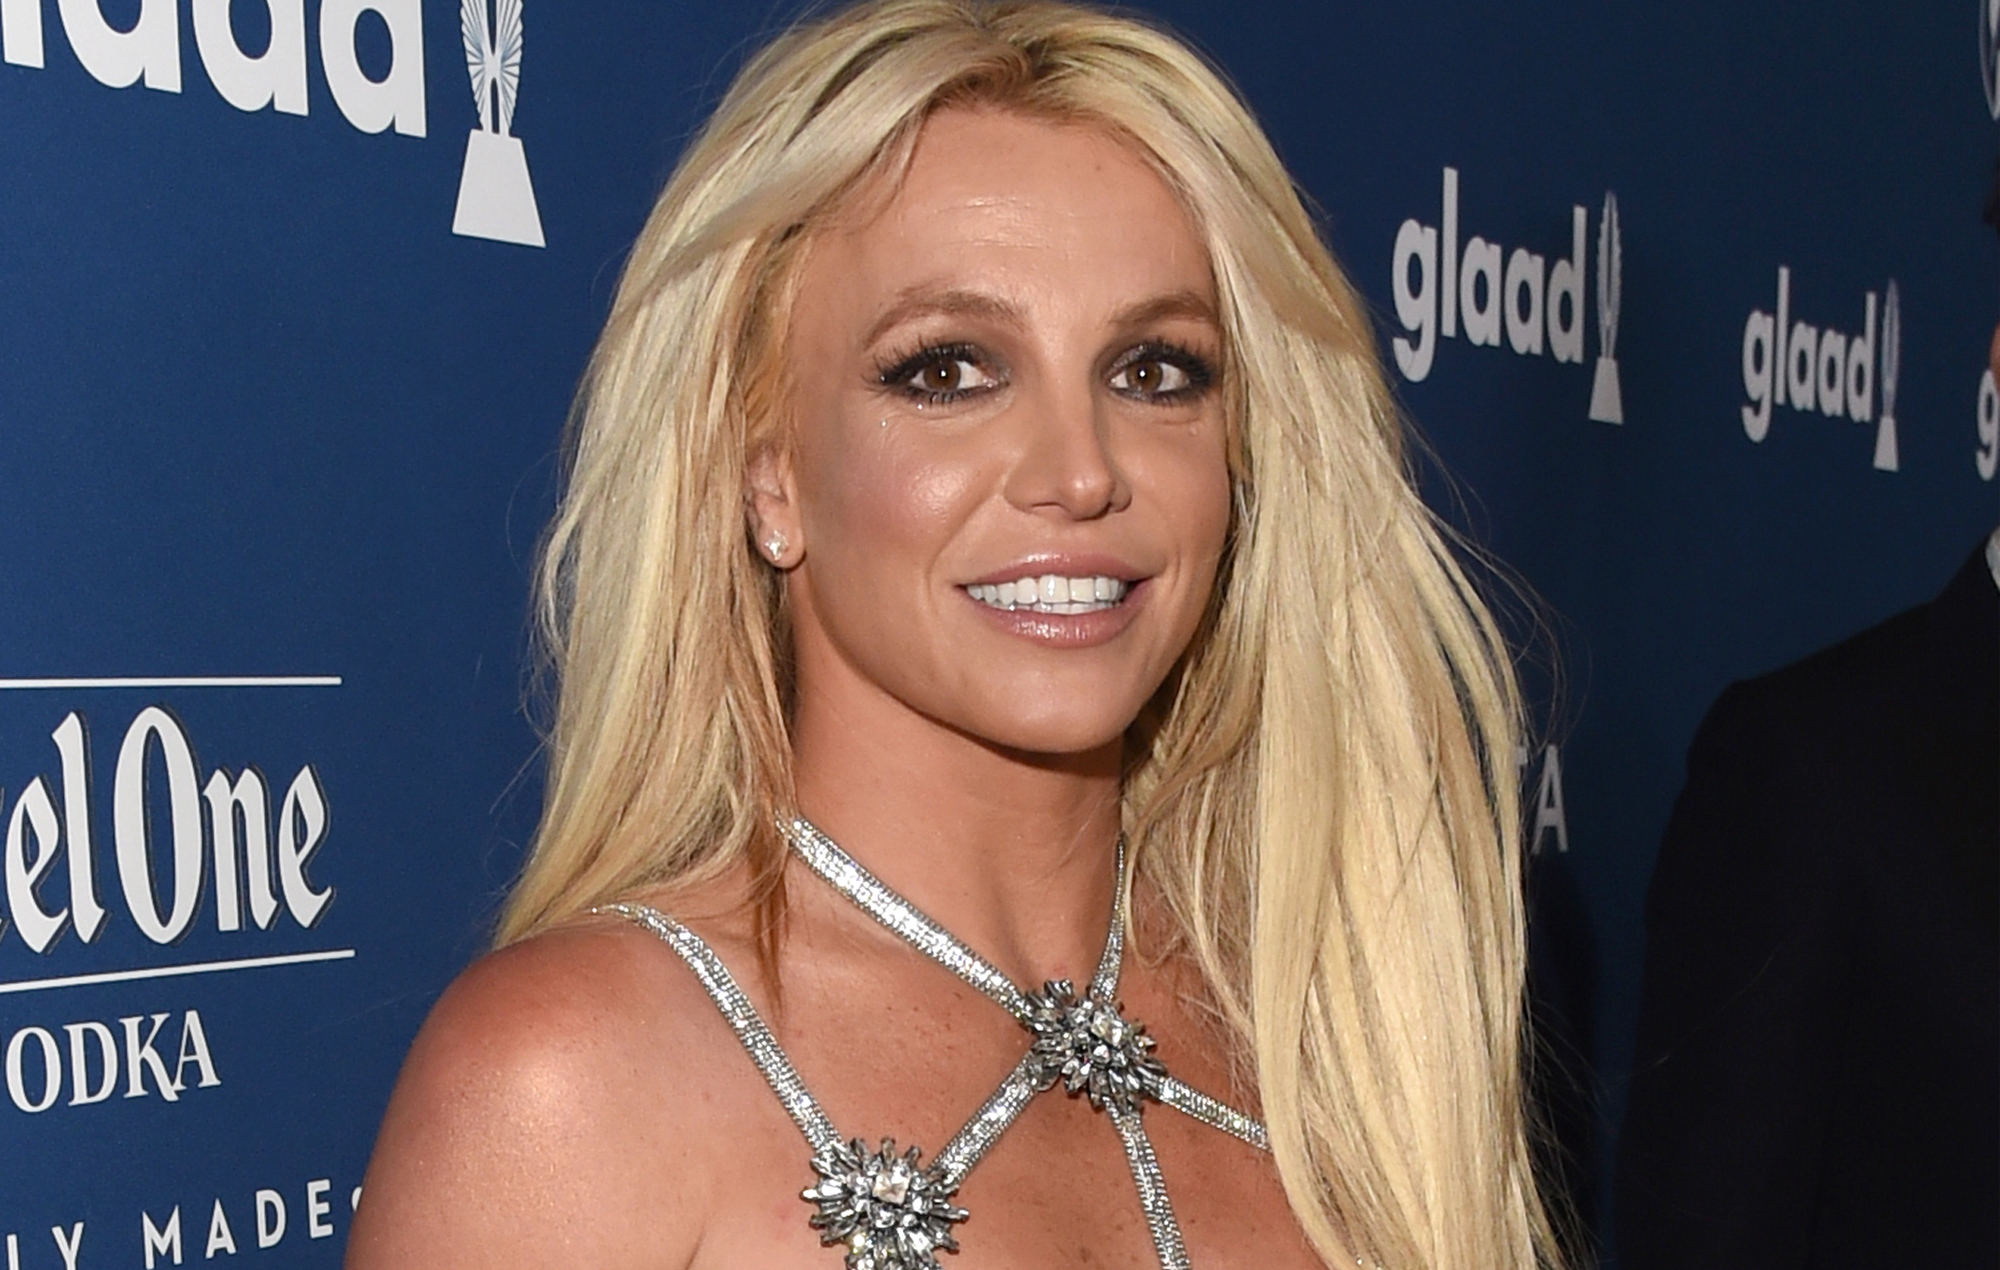 Britney Spears: ‘I Will Never Return to the Music Industry’ and New Album Rumors Are ‘Trash’